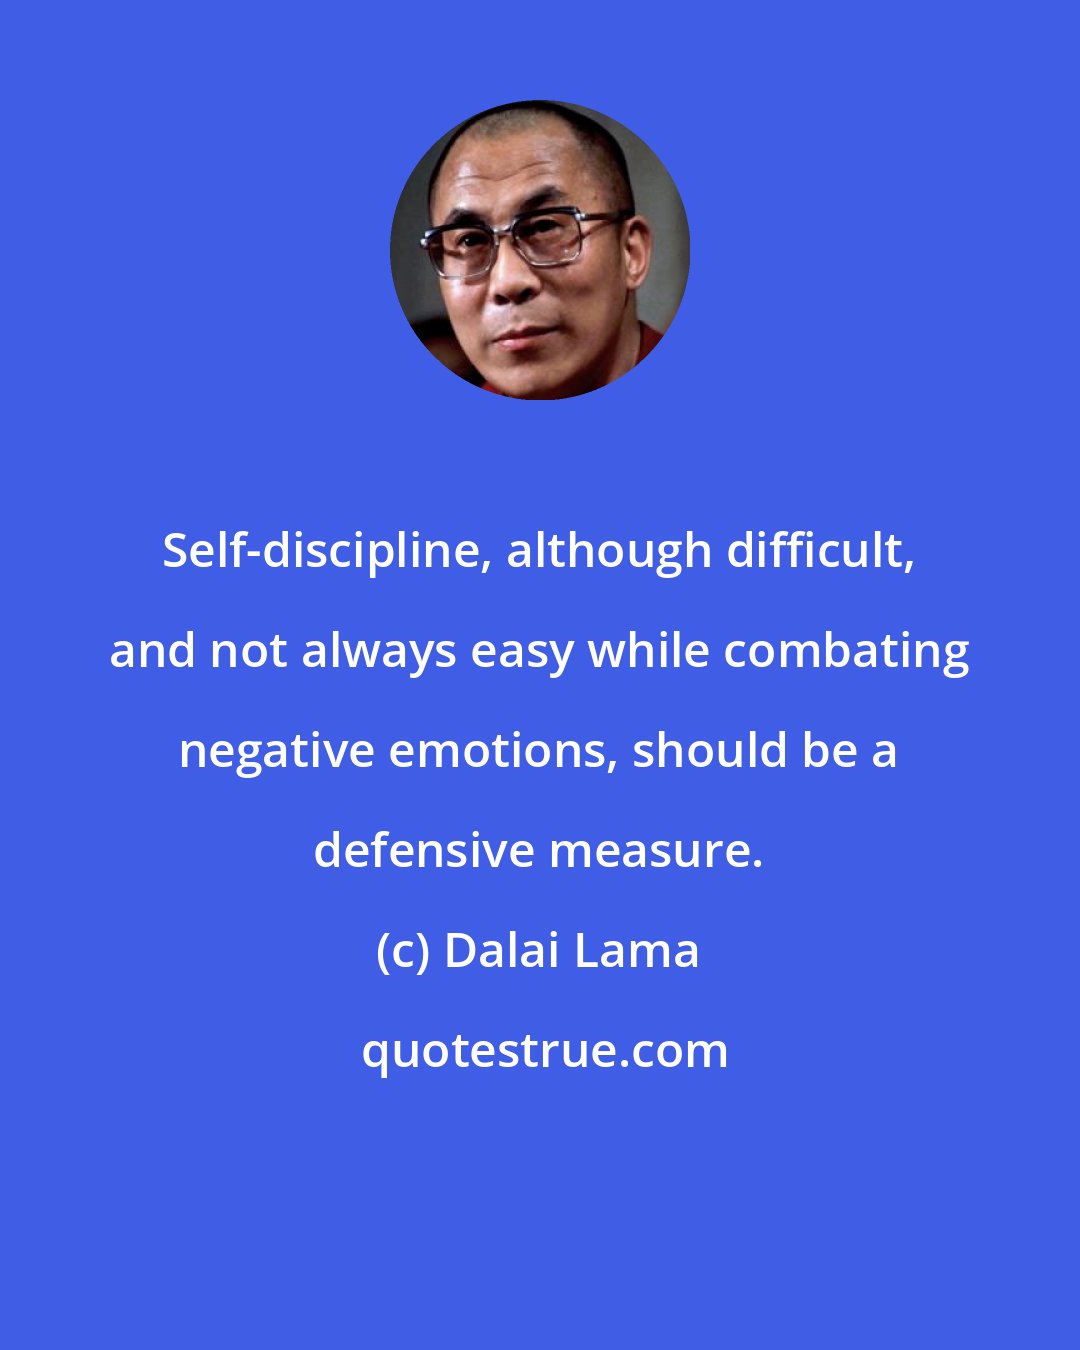 Dalai Lama: Self-discipline, although difficult, and not always easy while combating negative emotions, should be a defensive measure.